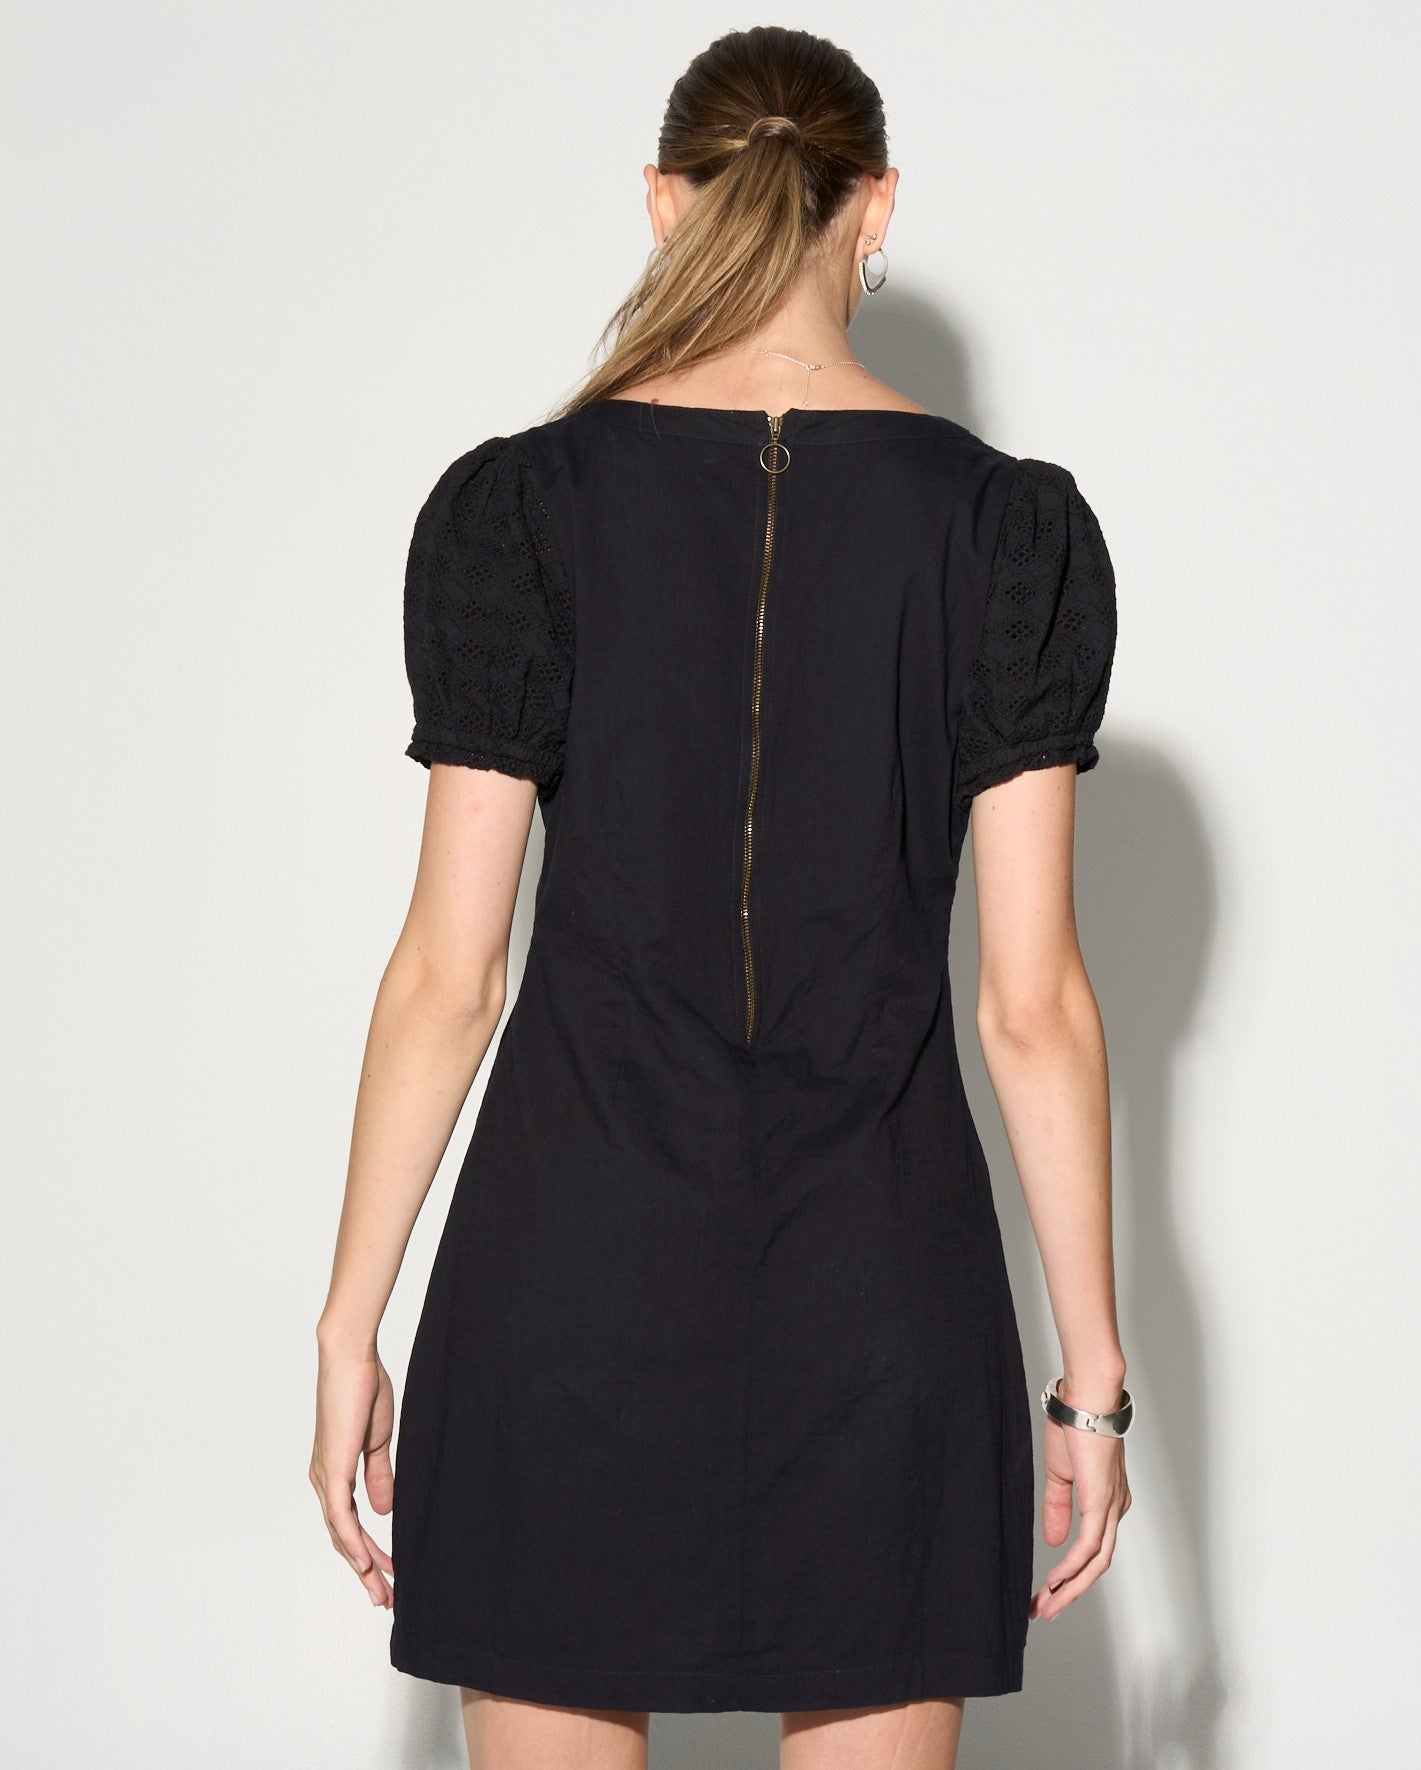 Black Shift Dress with Puff Shoulders - Free AU Shipping - GILD